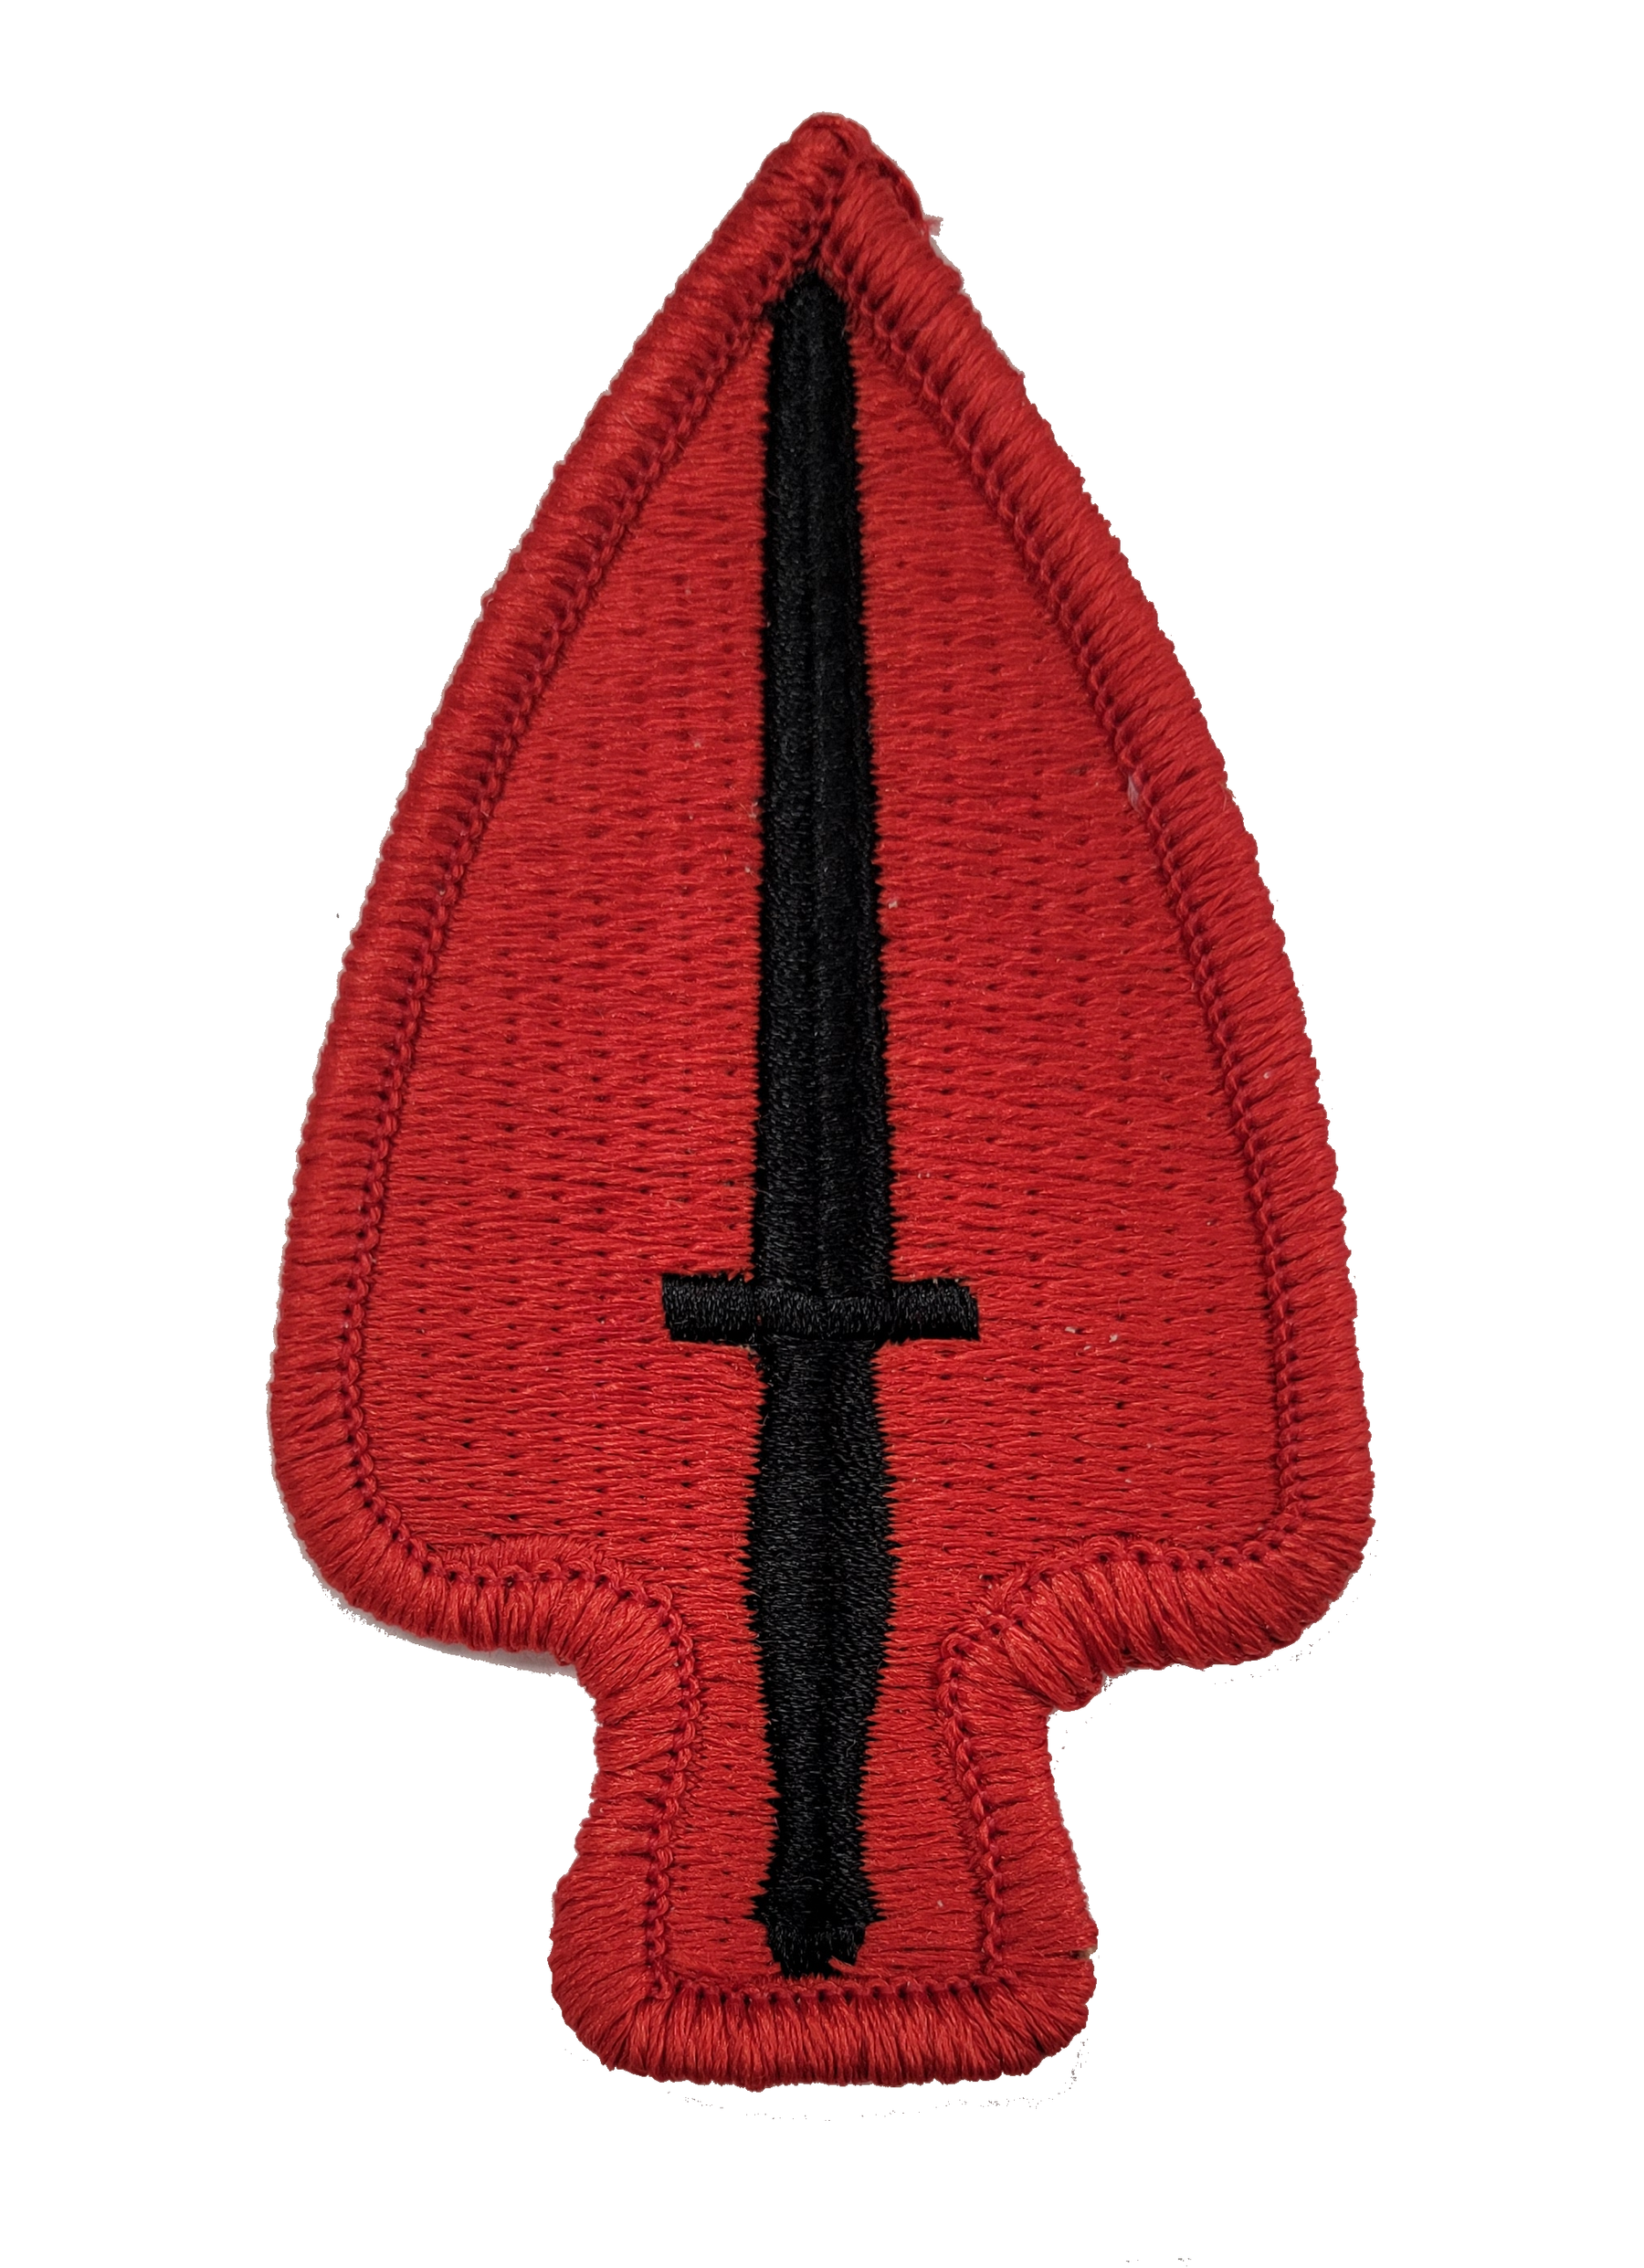 Special Forces Army Tab Red Embroidered Military Patch Iron or Sew AKPM131  